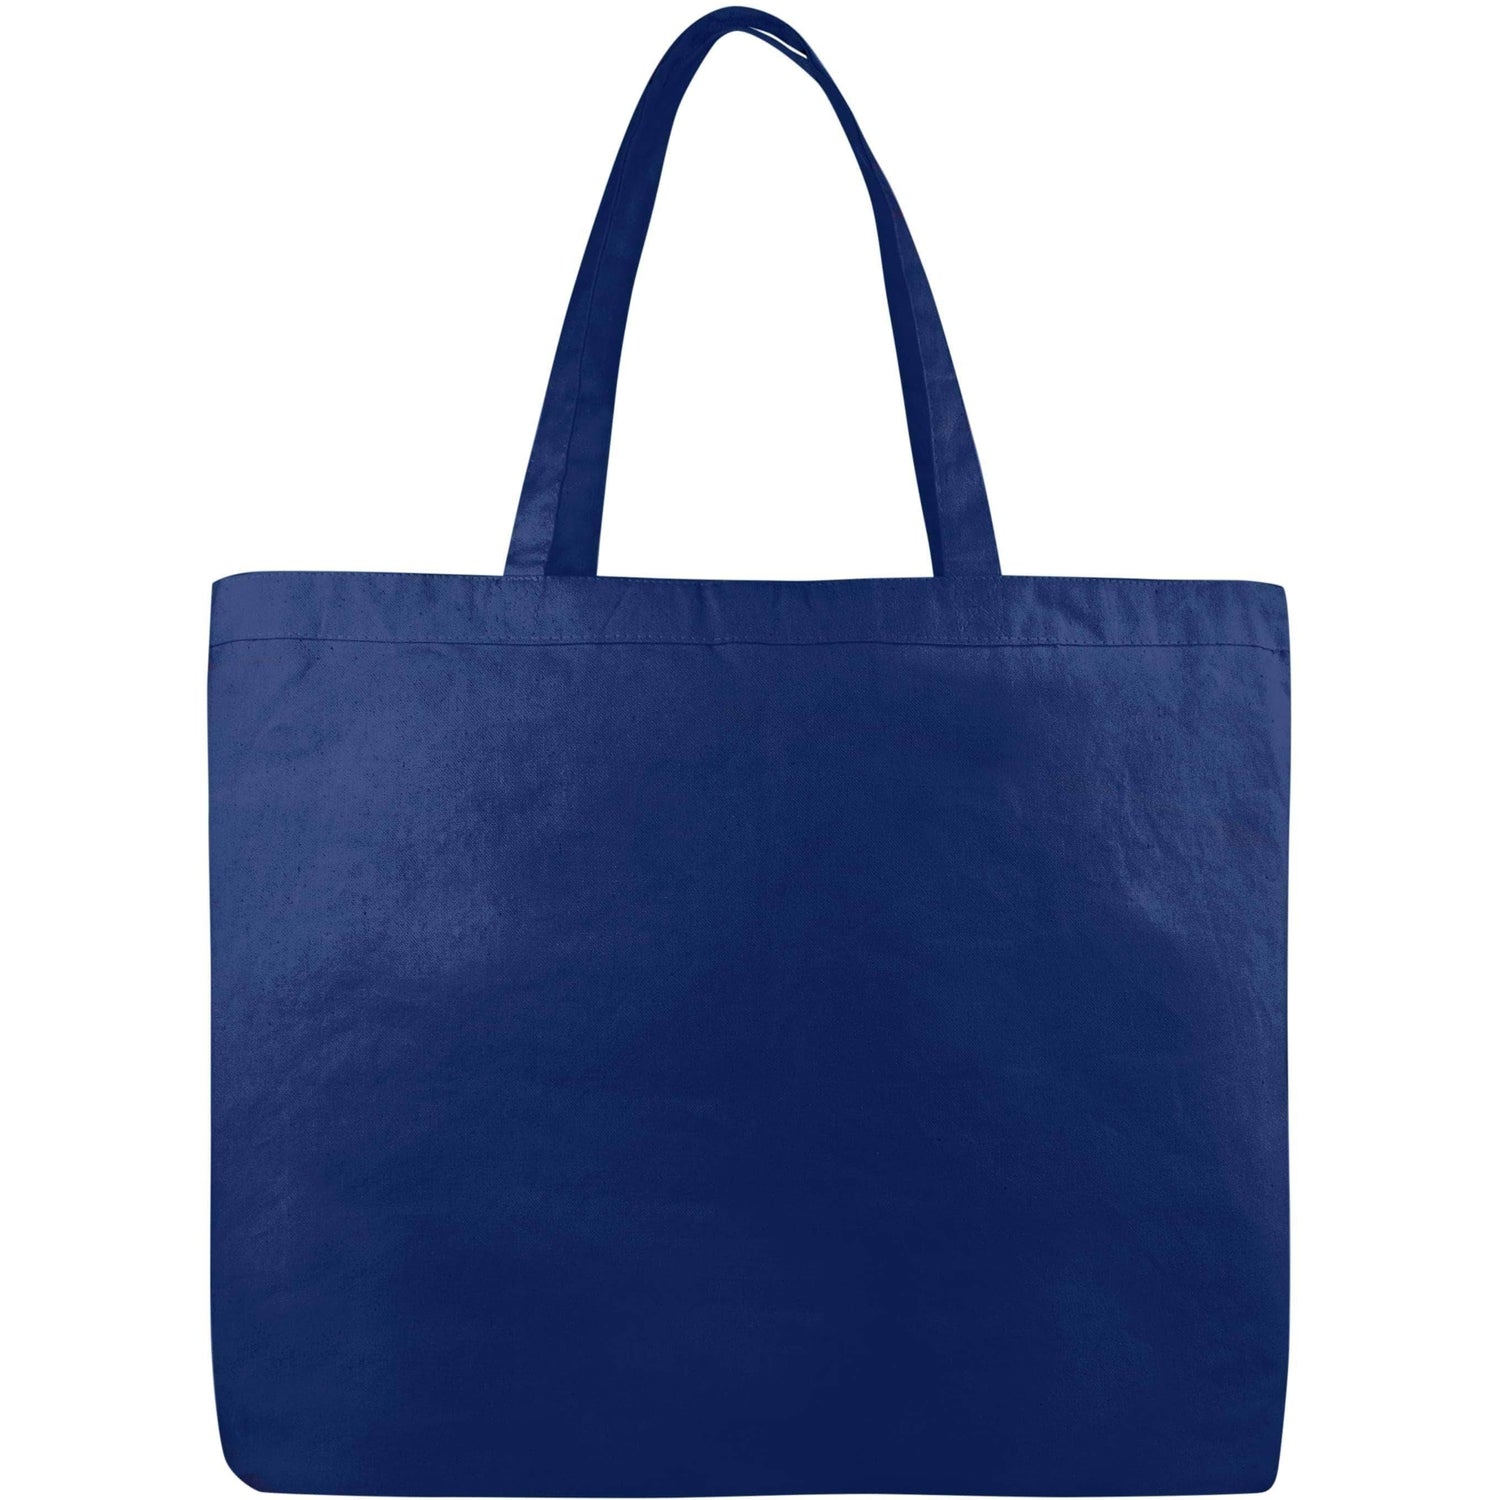 Extra Large Canvas Tote Bags Wholesale with Hook and Loop Closure